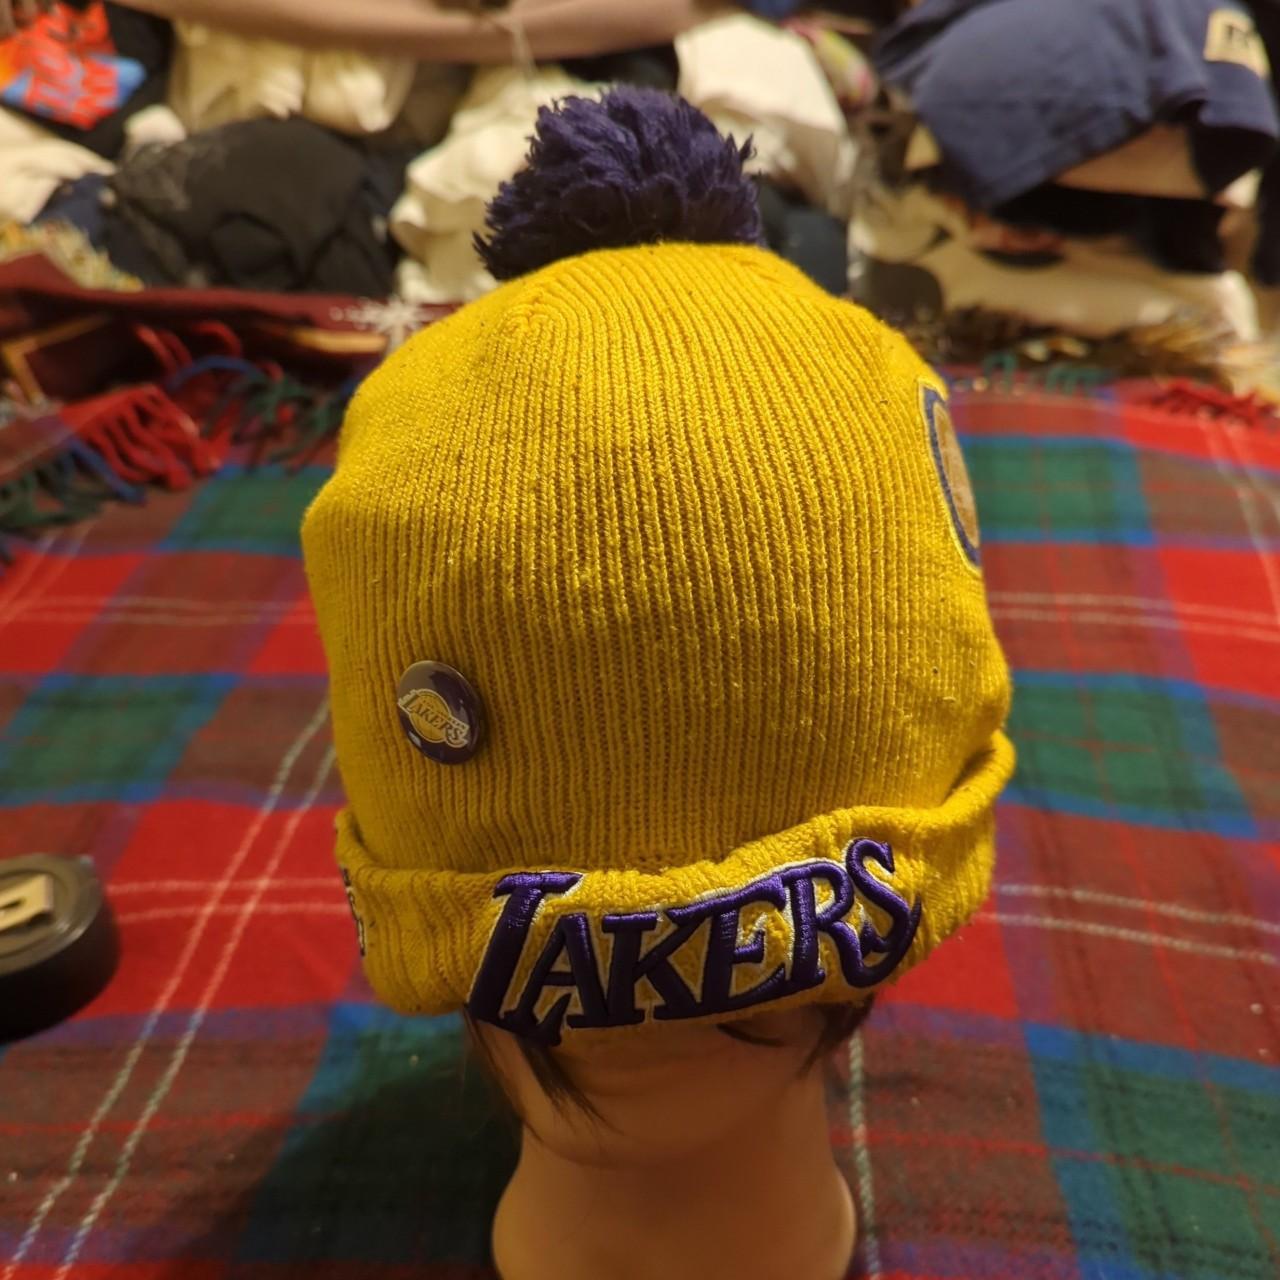 Los Angeles Lakers Mens Beanies, Lakers Knit, Winter Hats